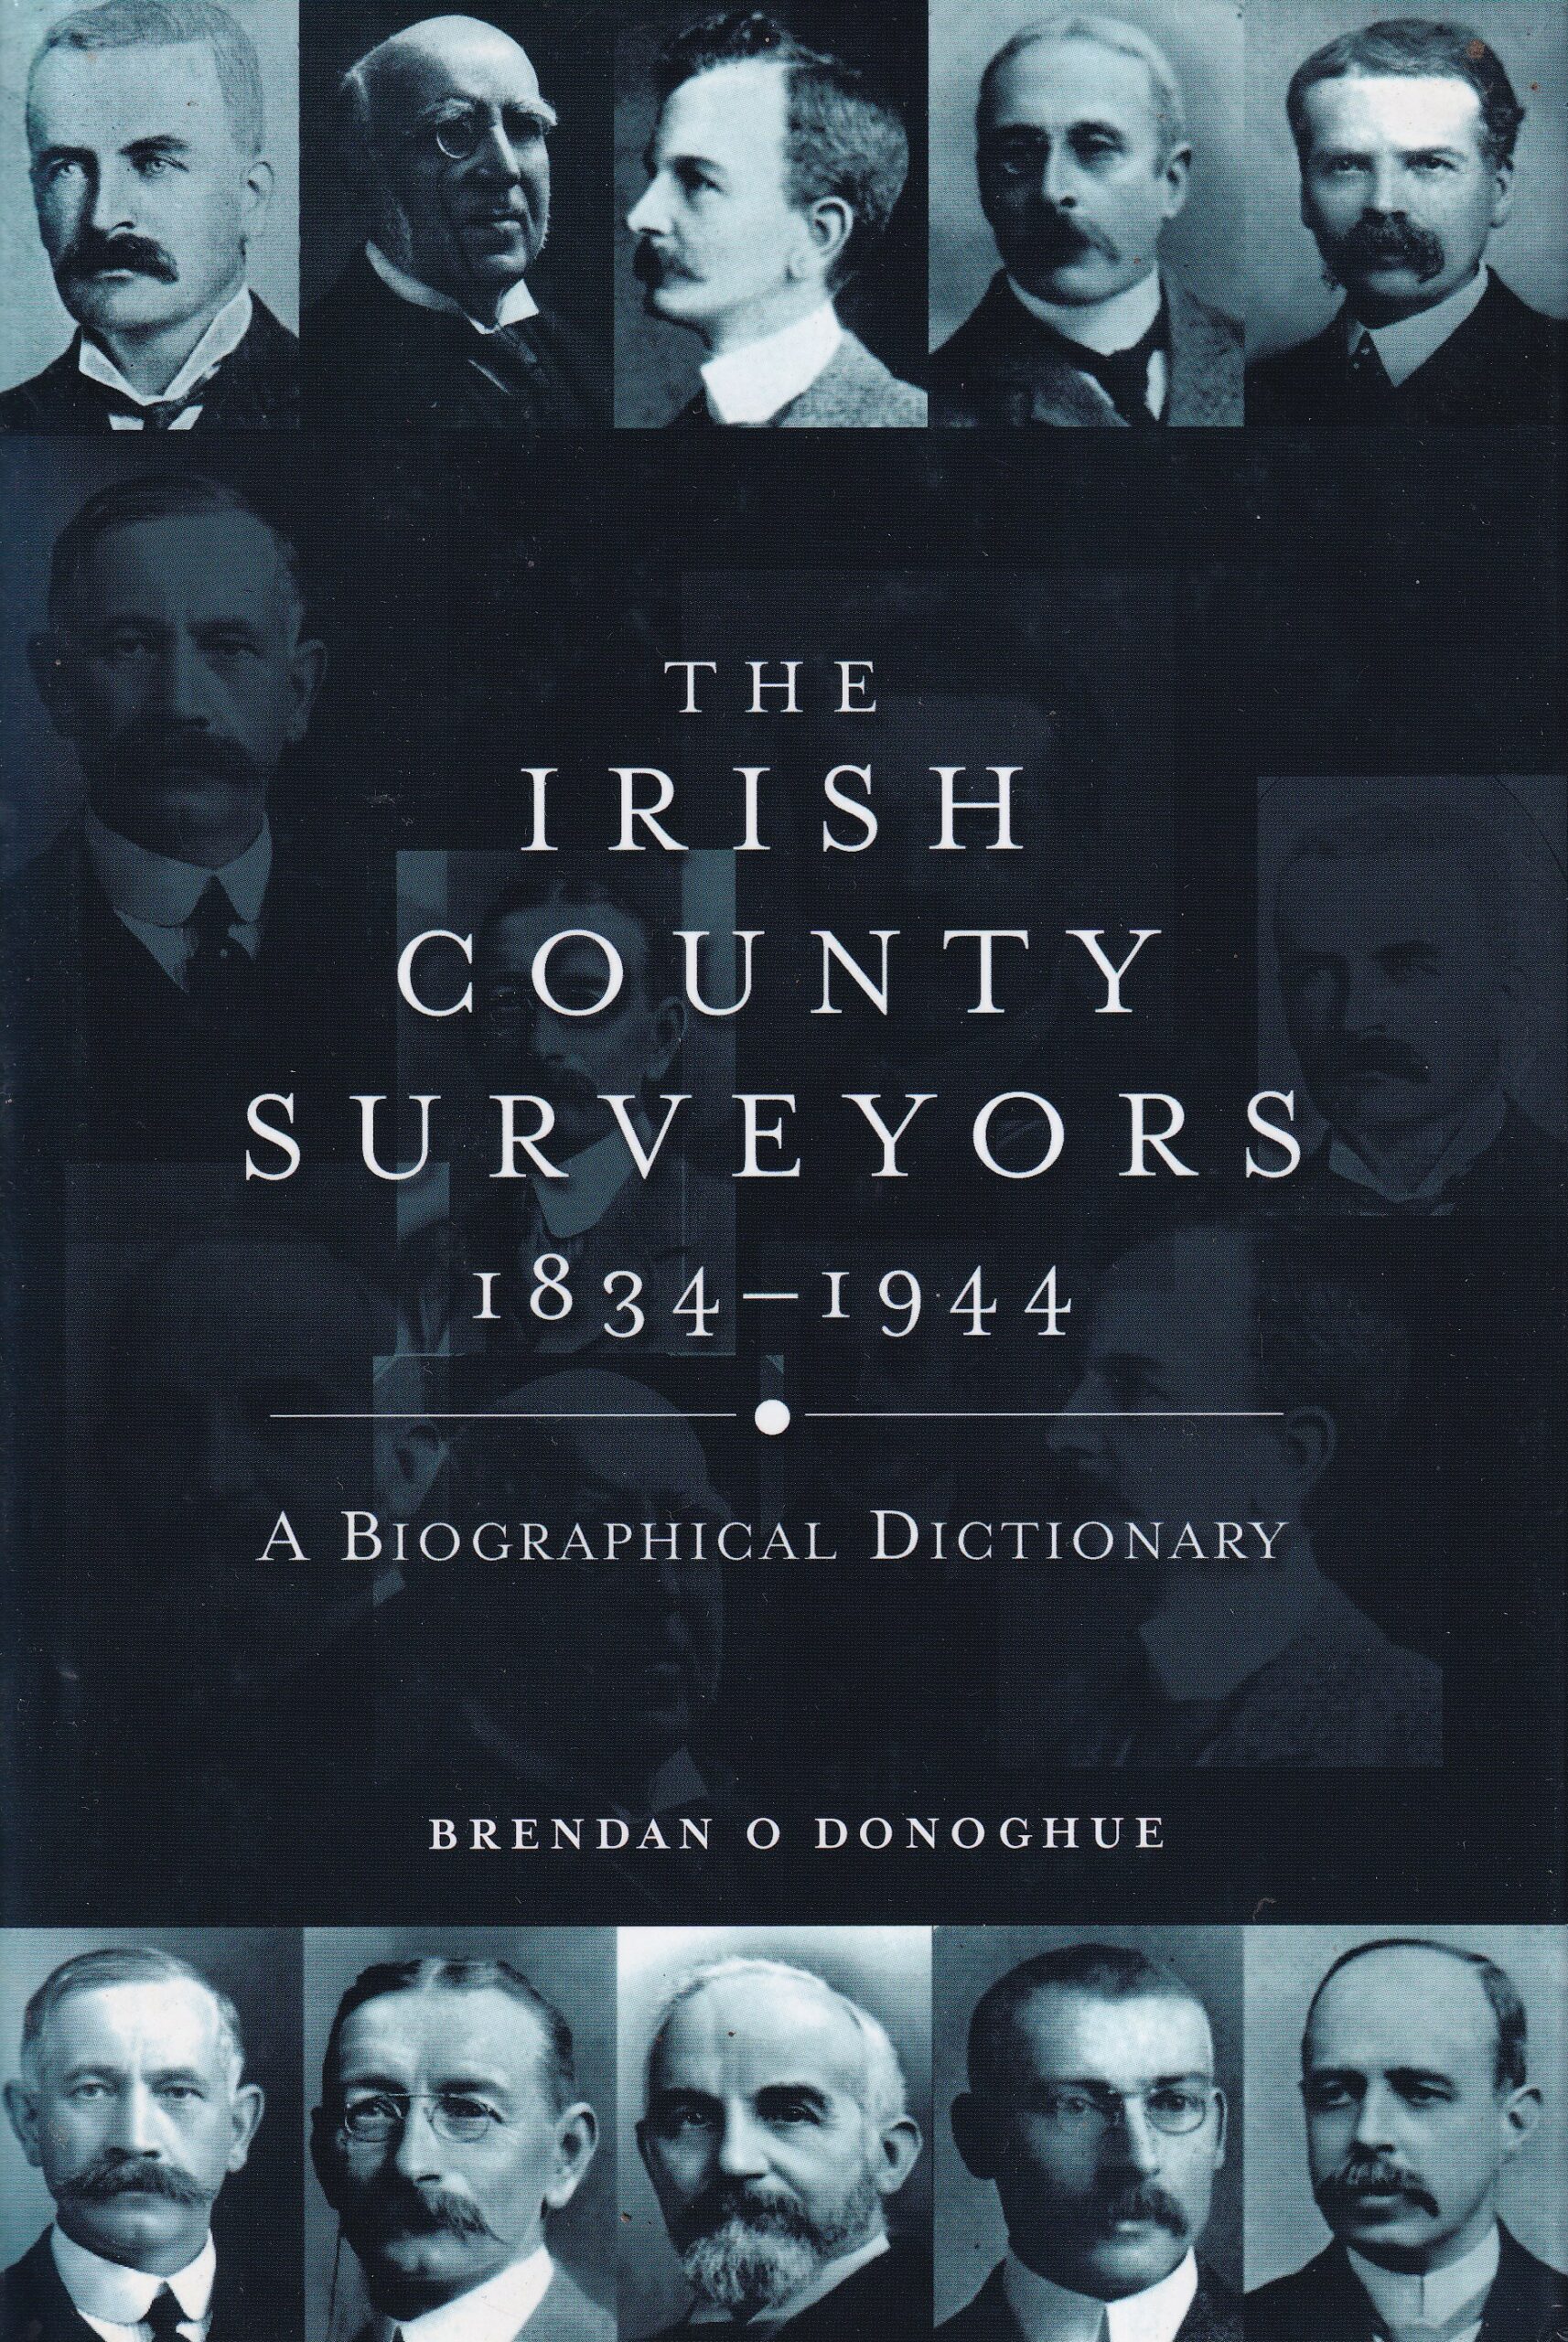 The Irish County Surveyors 1834-1944: A Bibliographical Dictionary by Brendan O' Donoghue